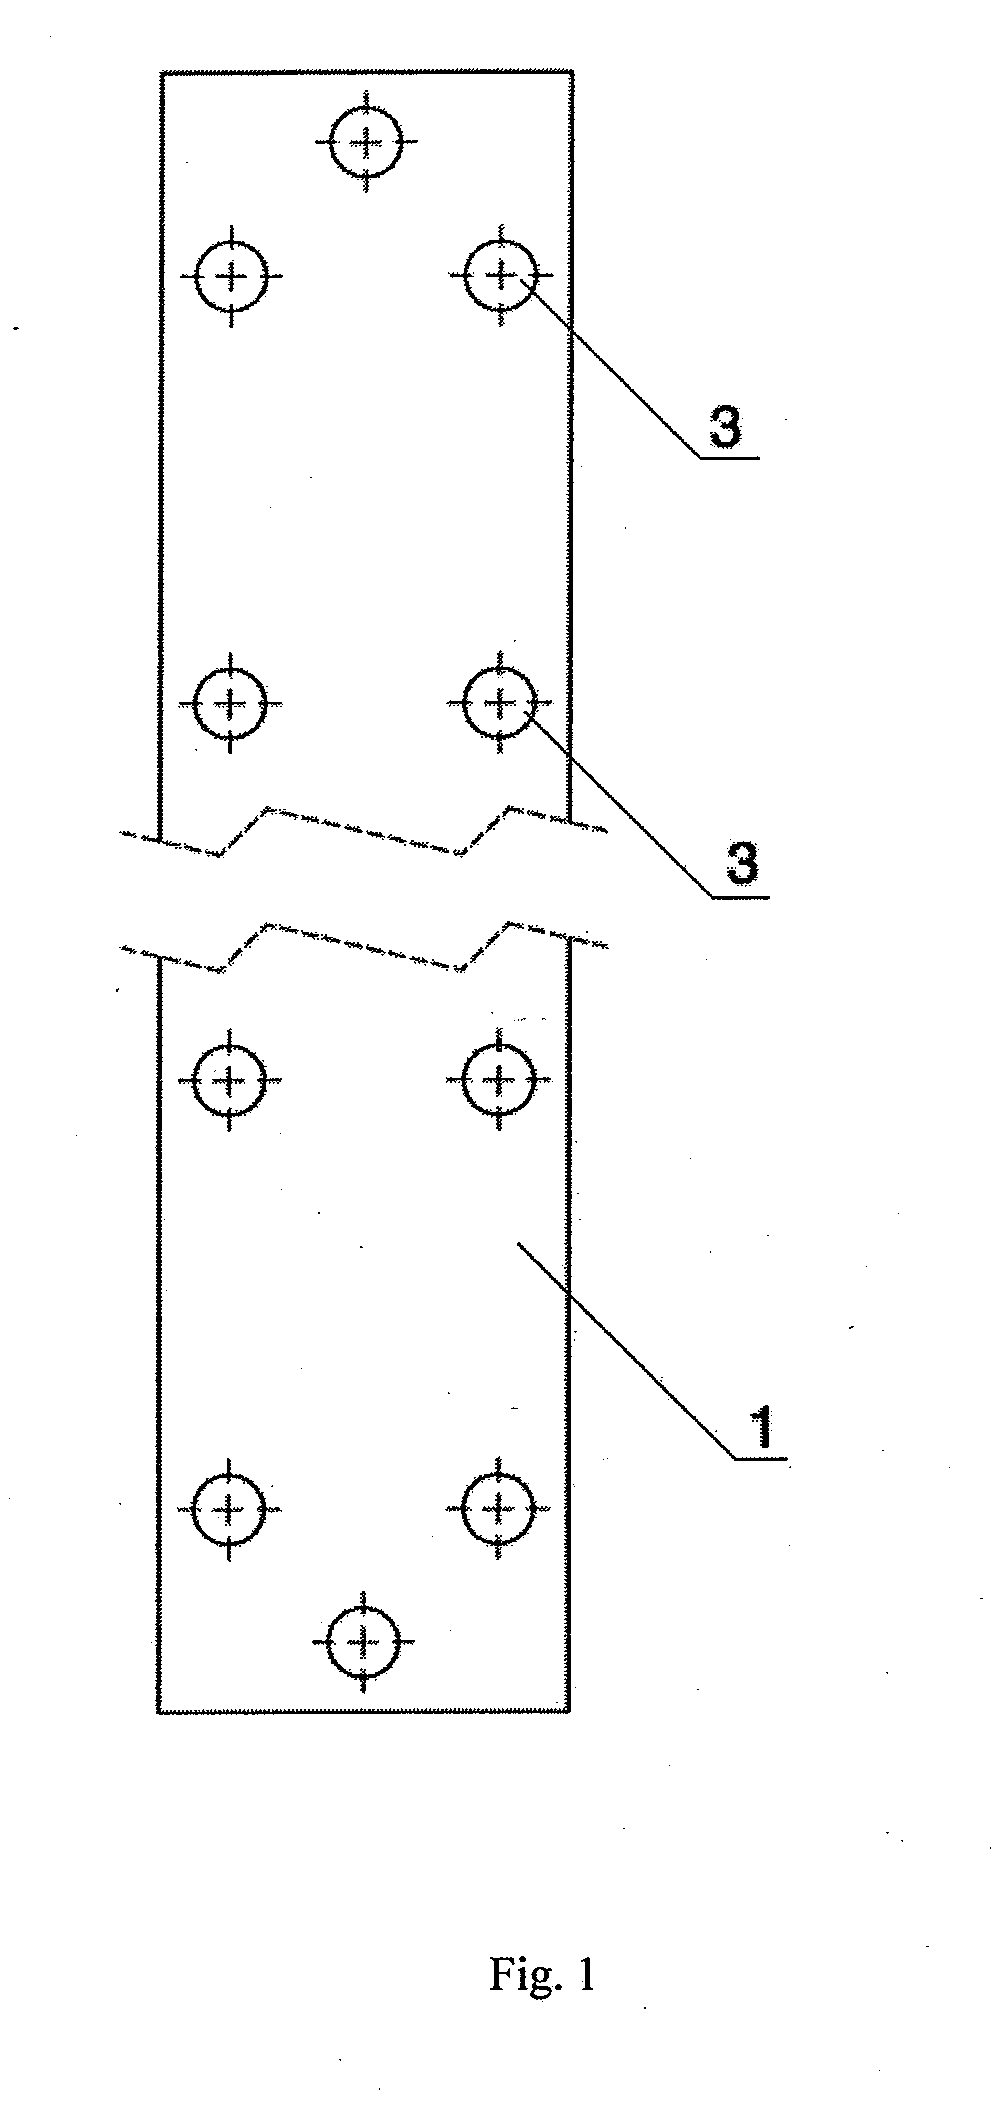 Construction set for covering substrate, in particular floor substrate